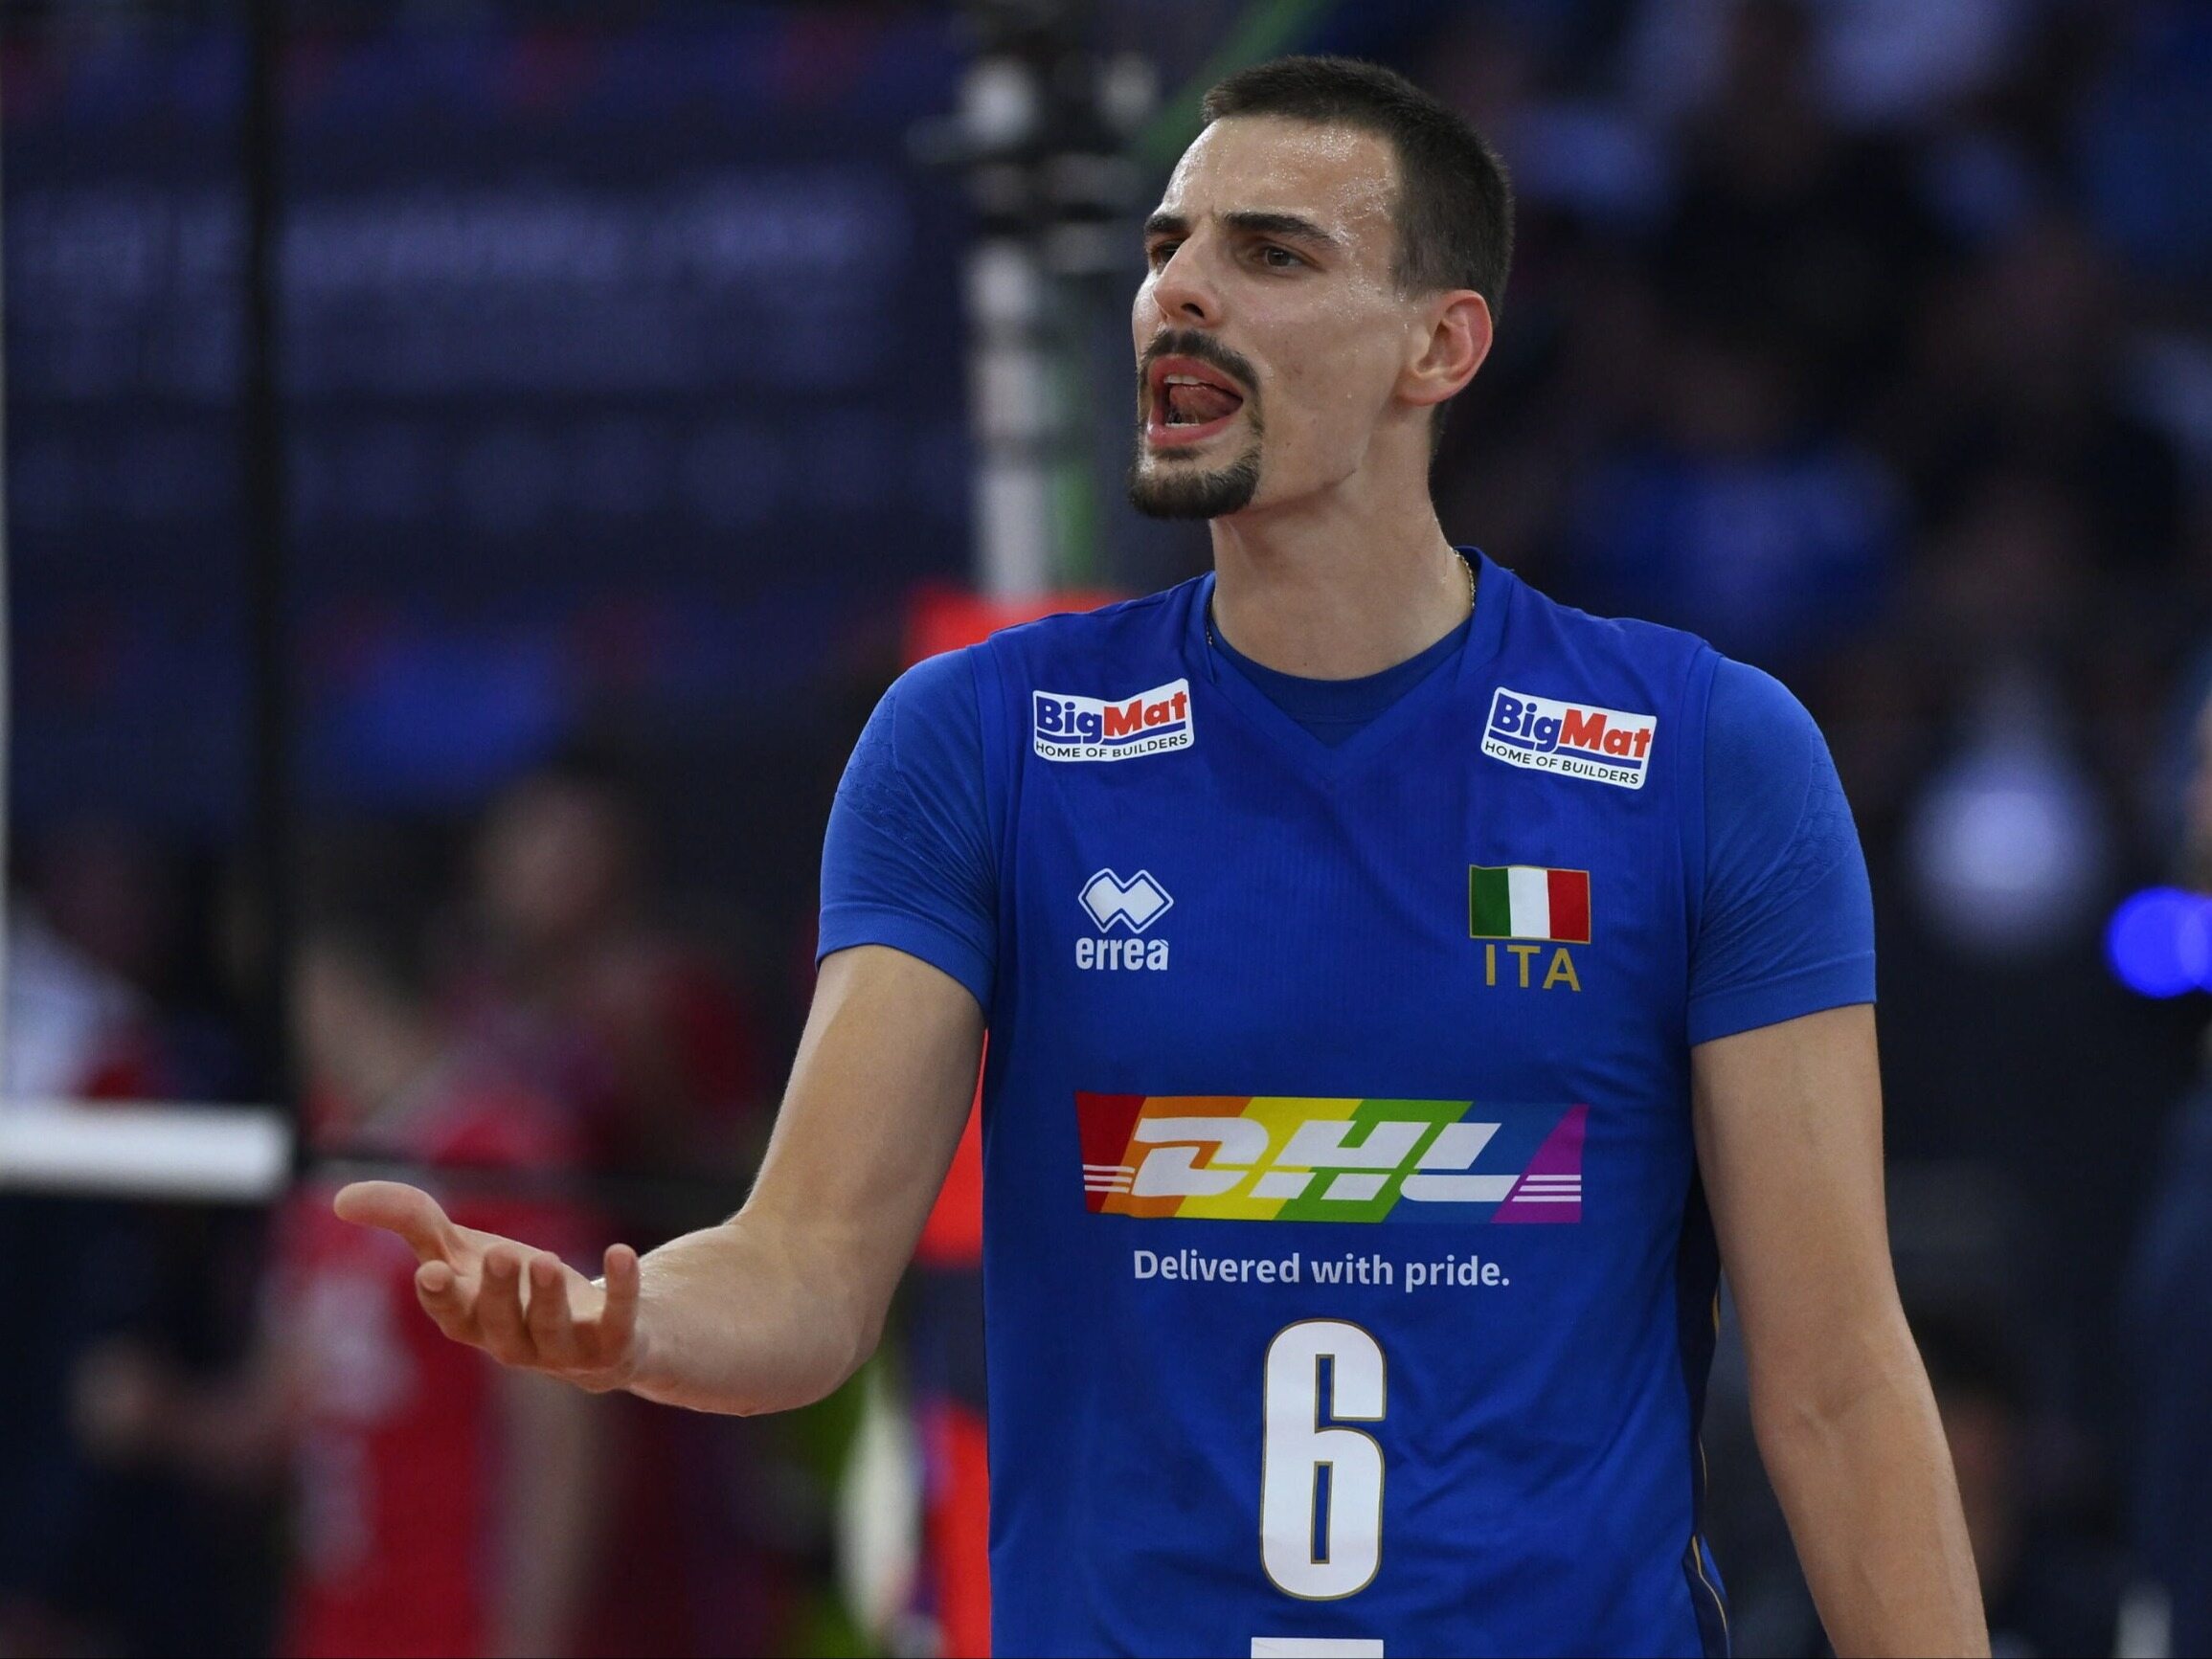 The Italian national volleyball player admitted this without hesitation.  He didn't blame anyone